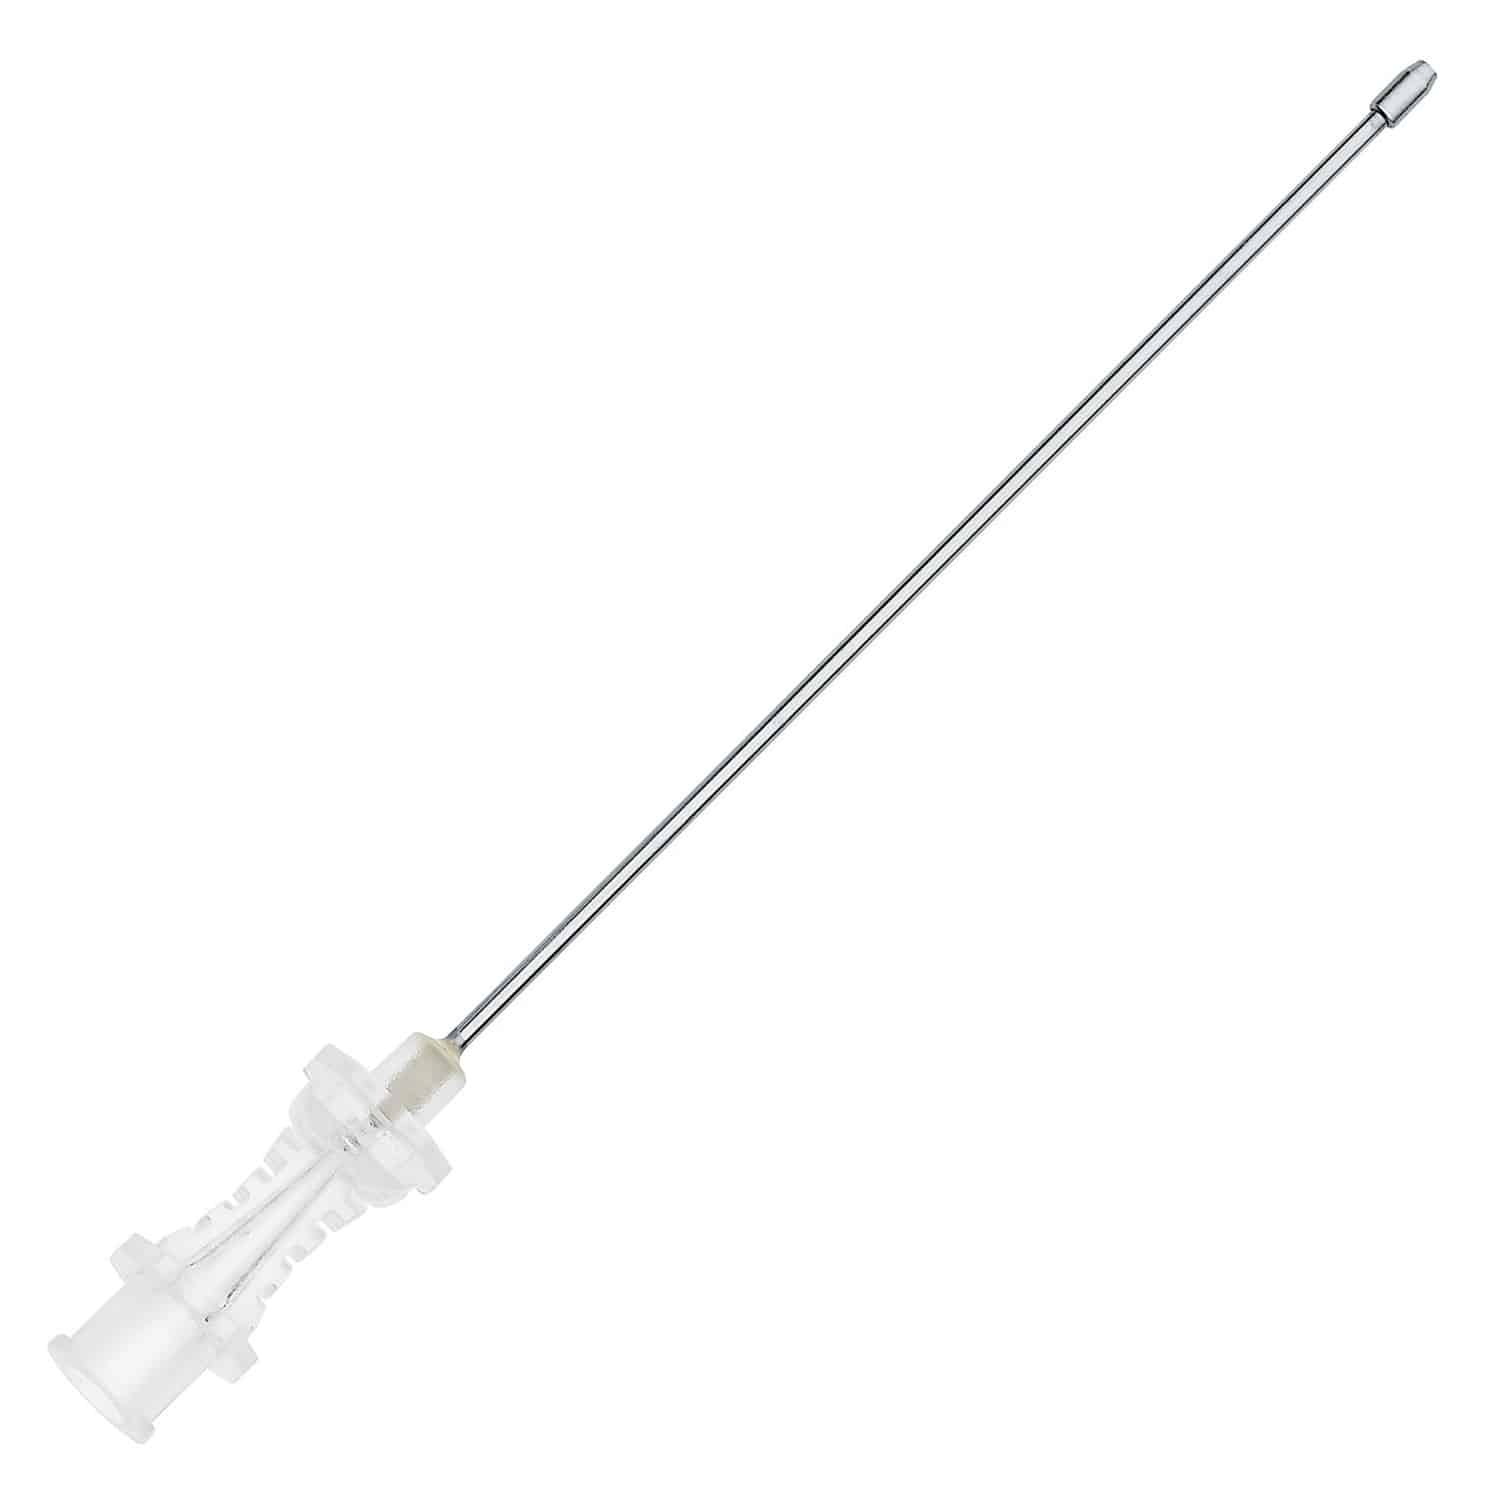 Peha®-Instrument Button Cannula For Topical Wound Irrigation